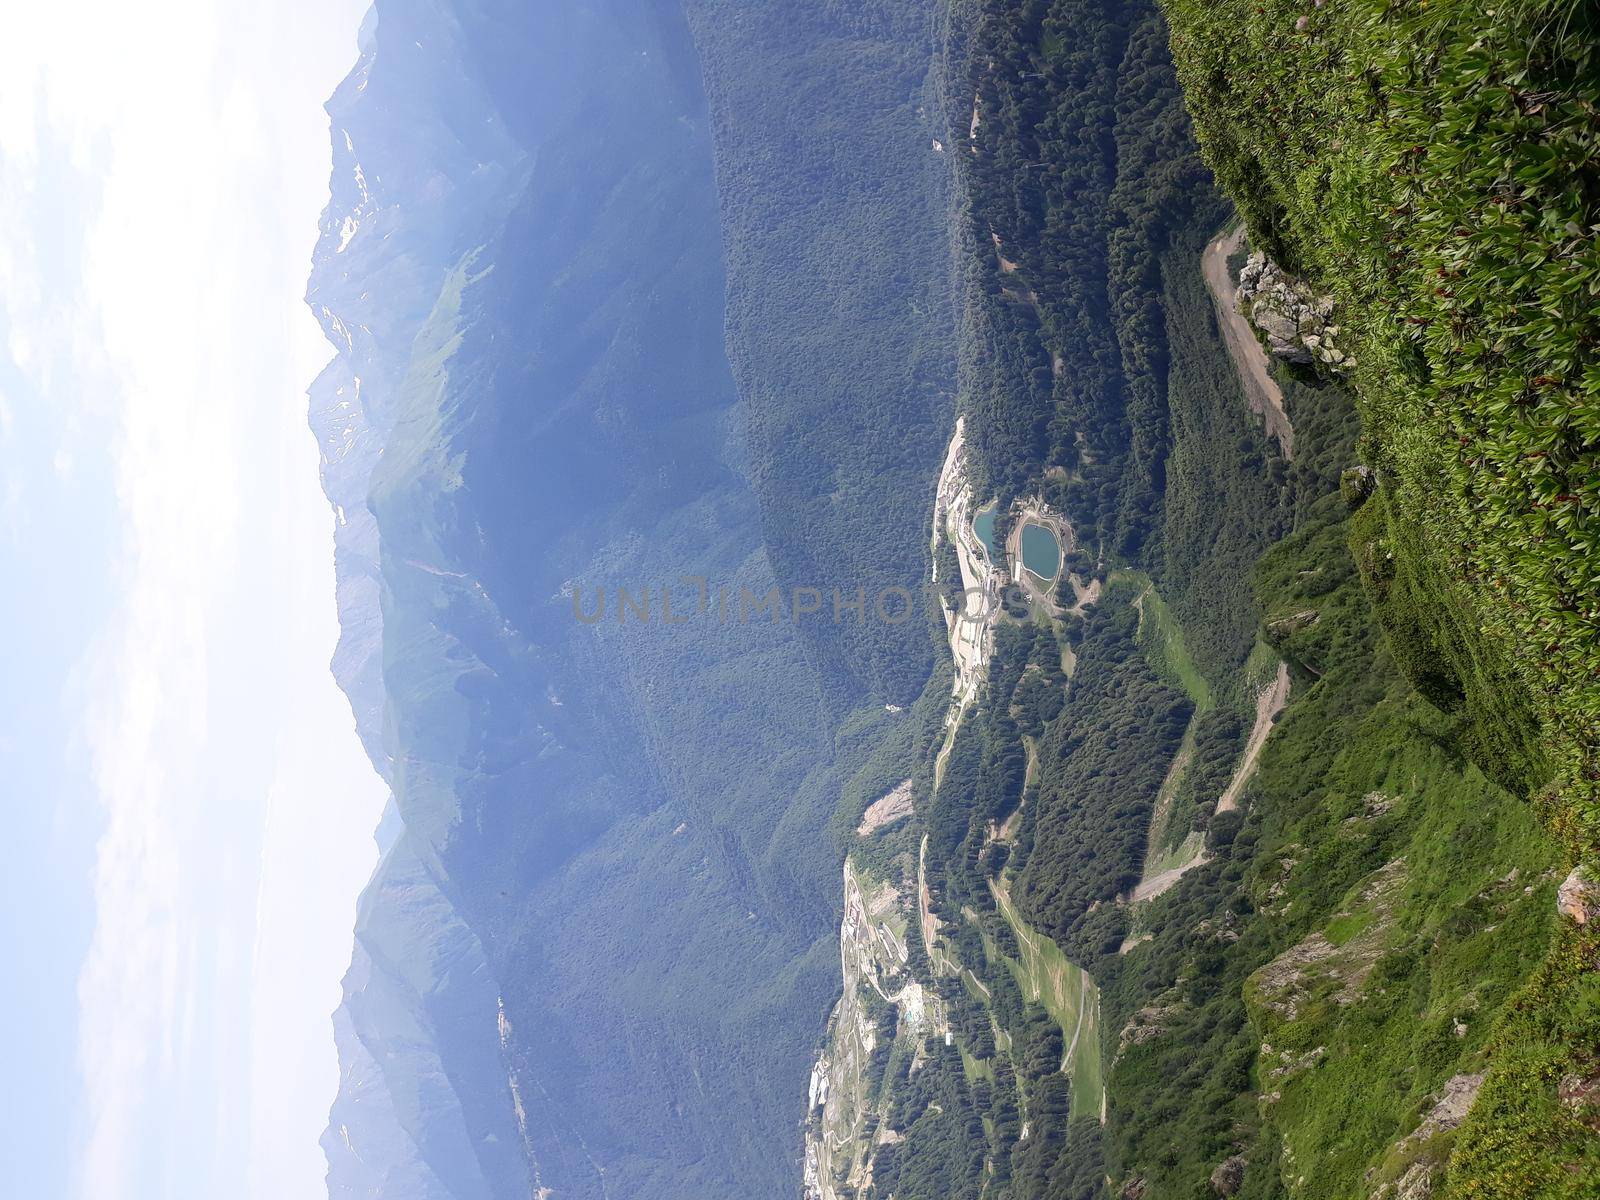 Panoramic mountain landscape with valleys and forested mountain peaks.